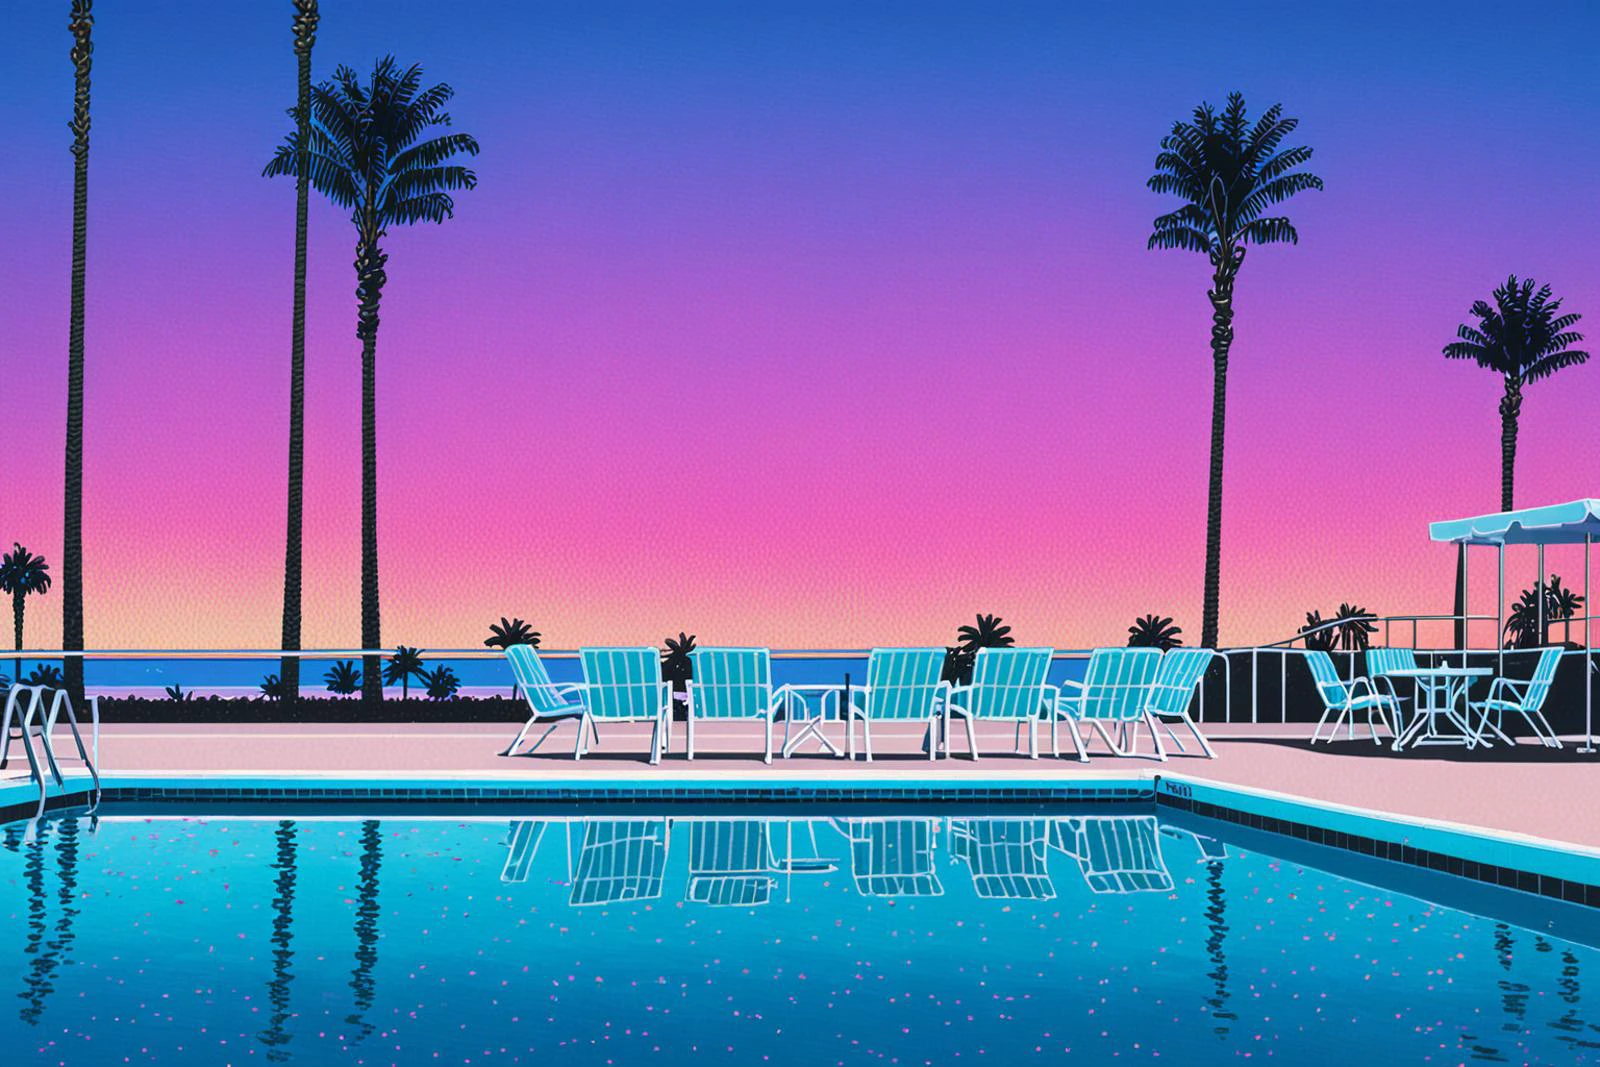 Lifted view of A 80's pool surrounded by beach and Palm Trees at sunset, gradient sky, water reflection, road, chairs, 